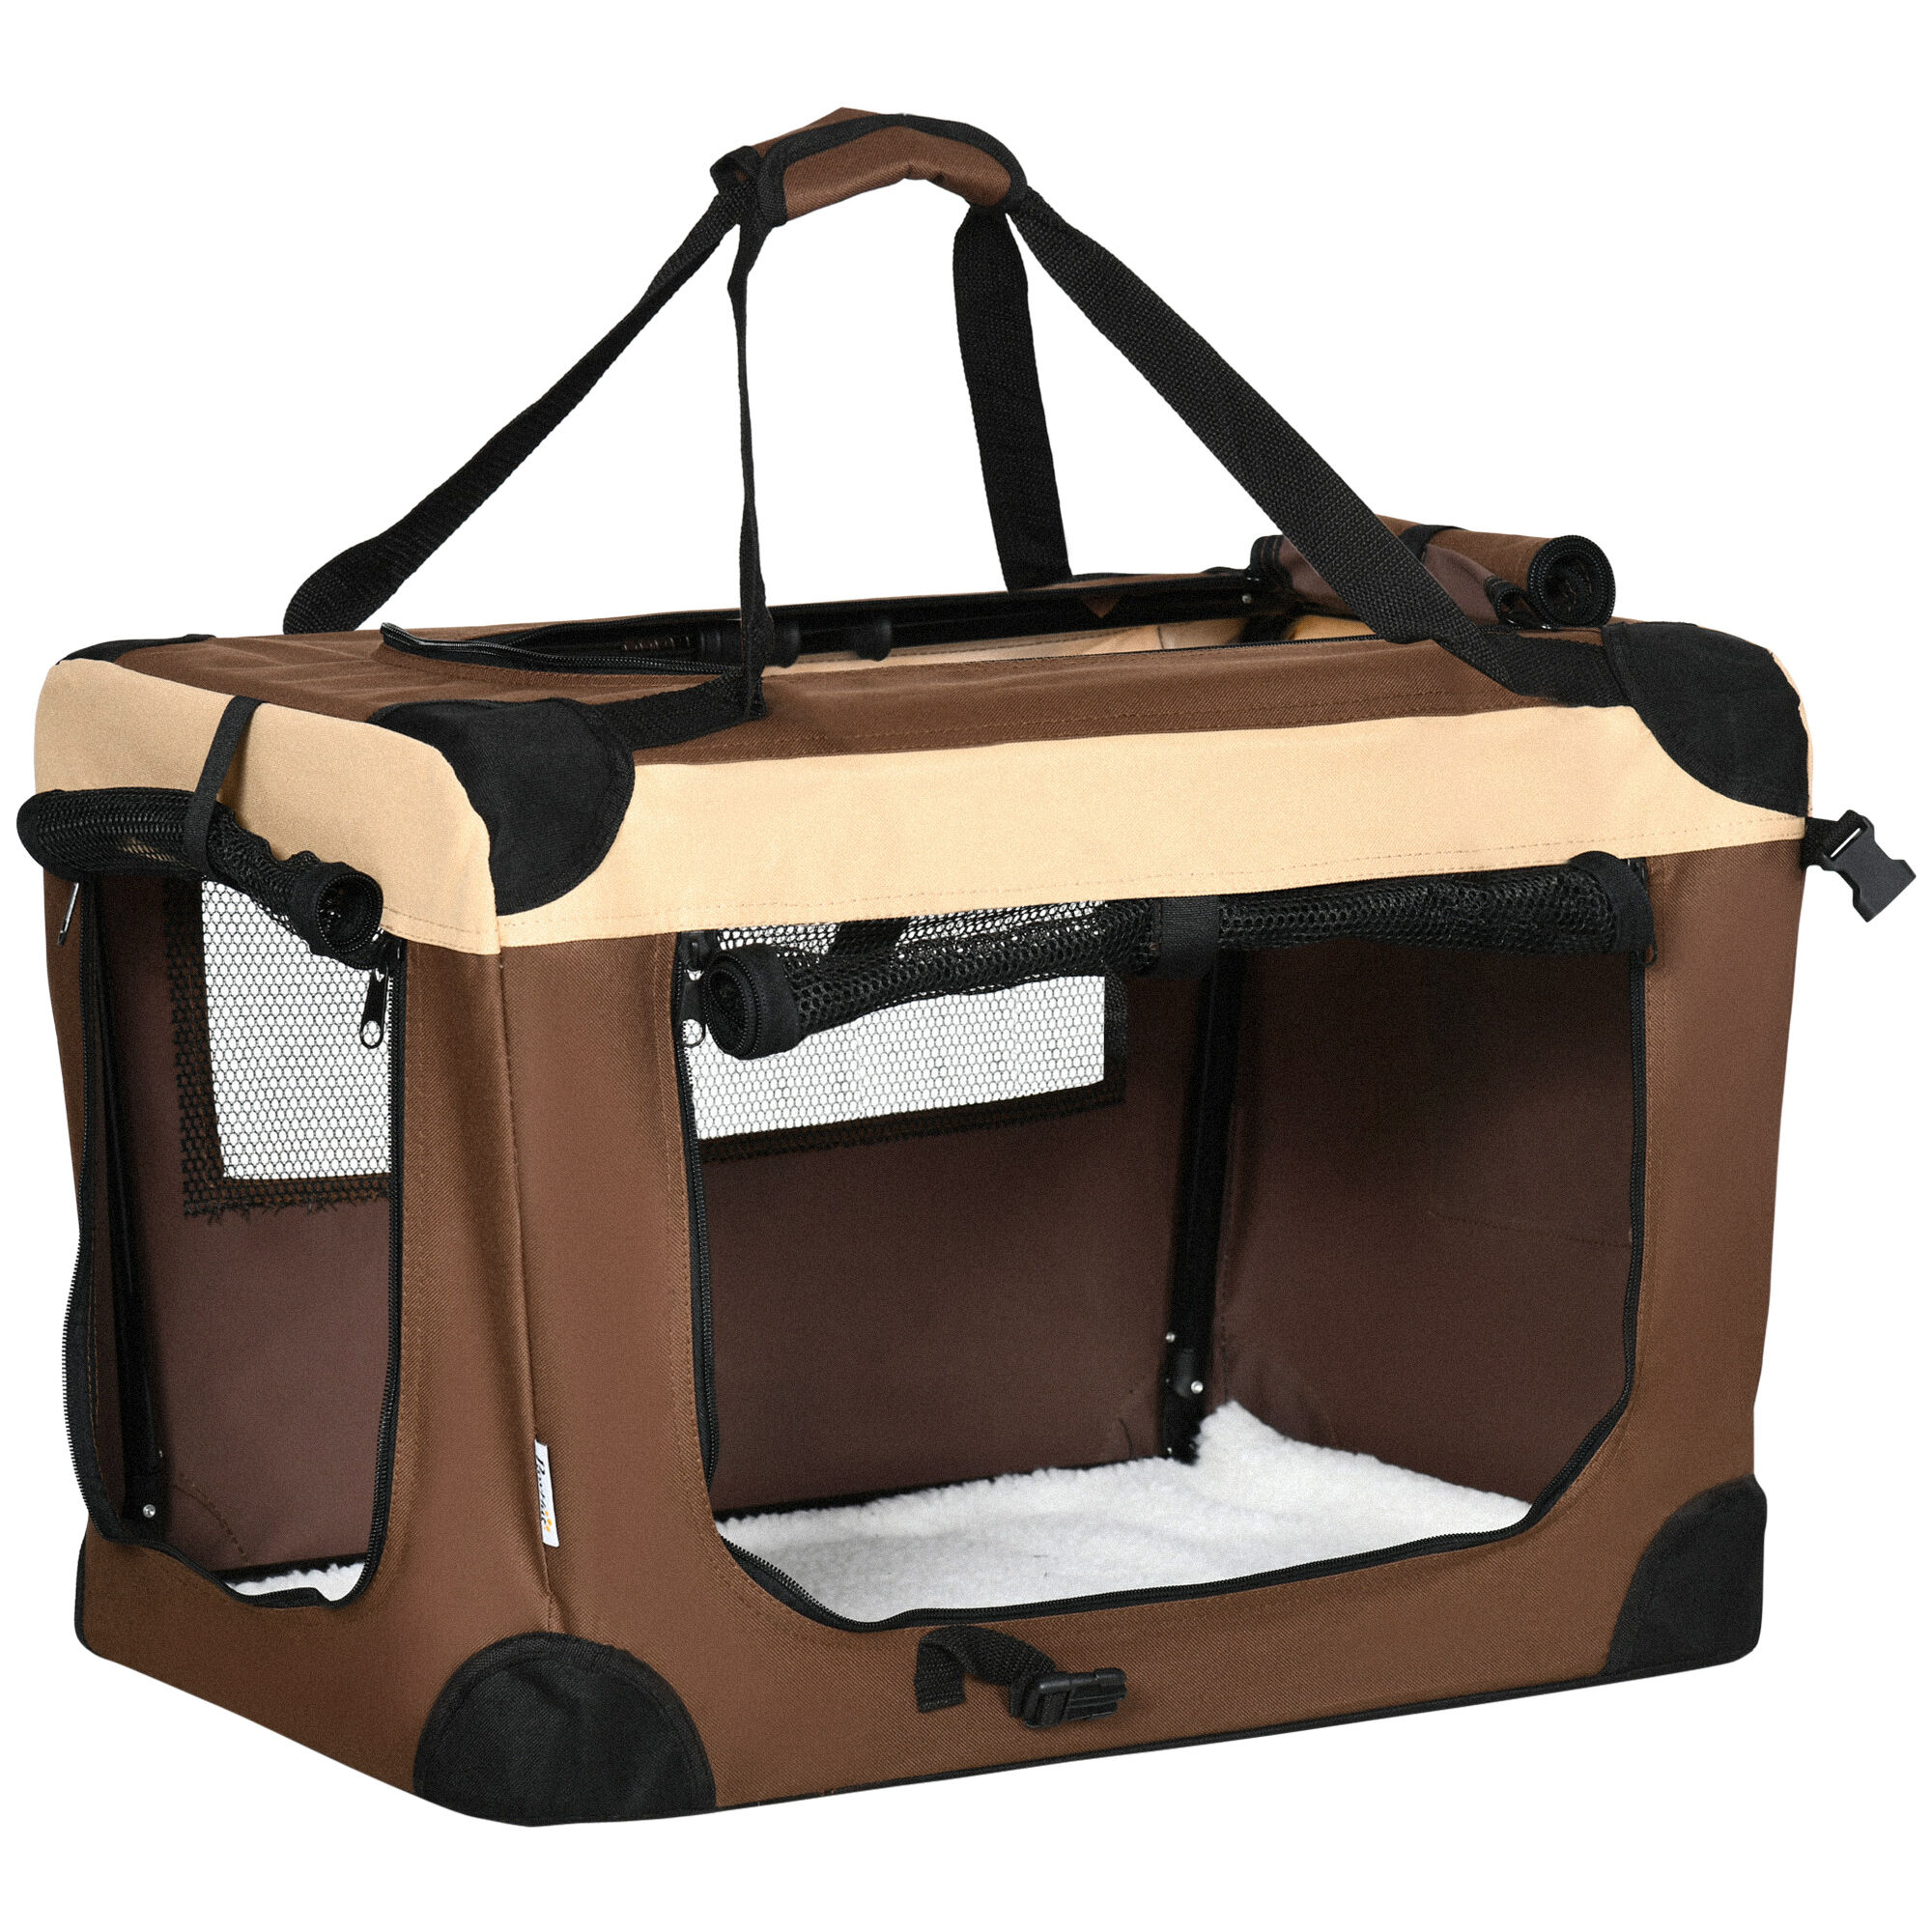 PawHut Pet Carrier, 60cm Foldable Travel Bag for Small Dogs and Cats, Comfortable with Cushion, Brown